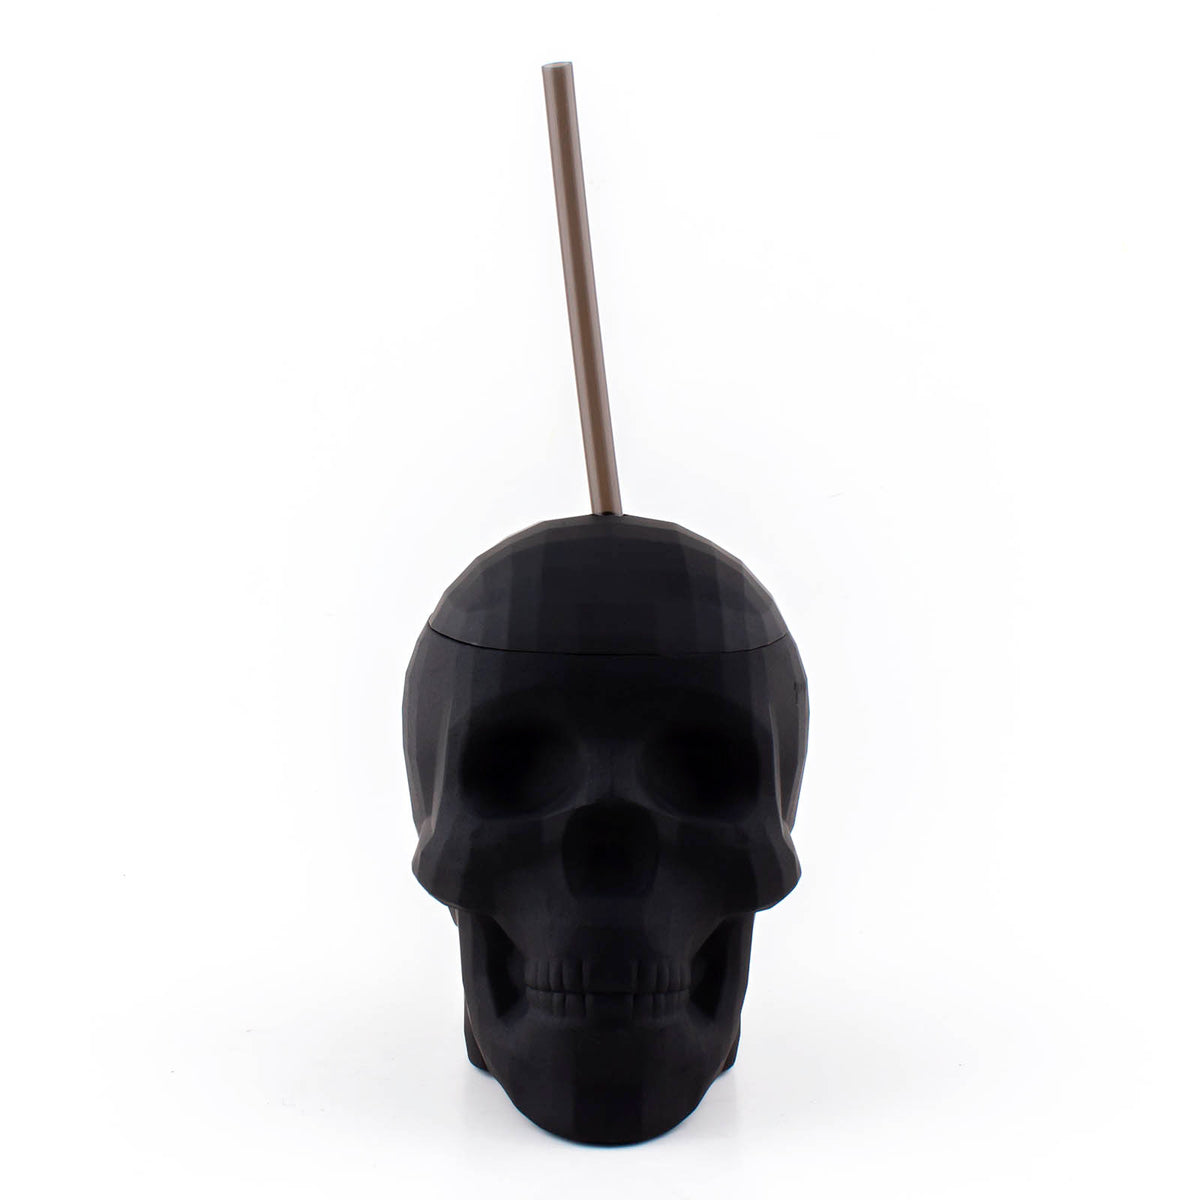 Skull Glass Cup With Straw. 5 3/4 Tall x 4 Wide Set of 2 NEW